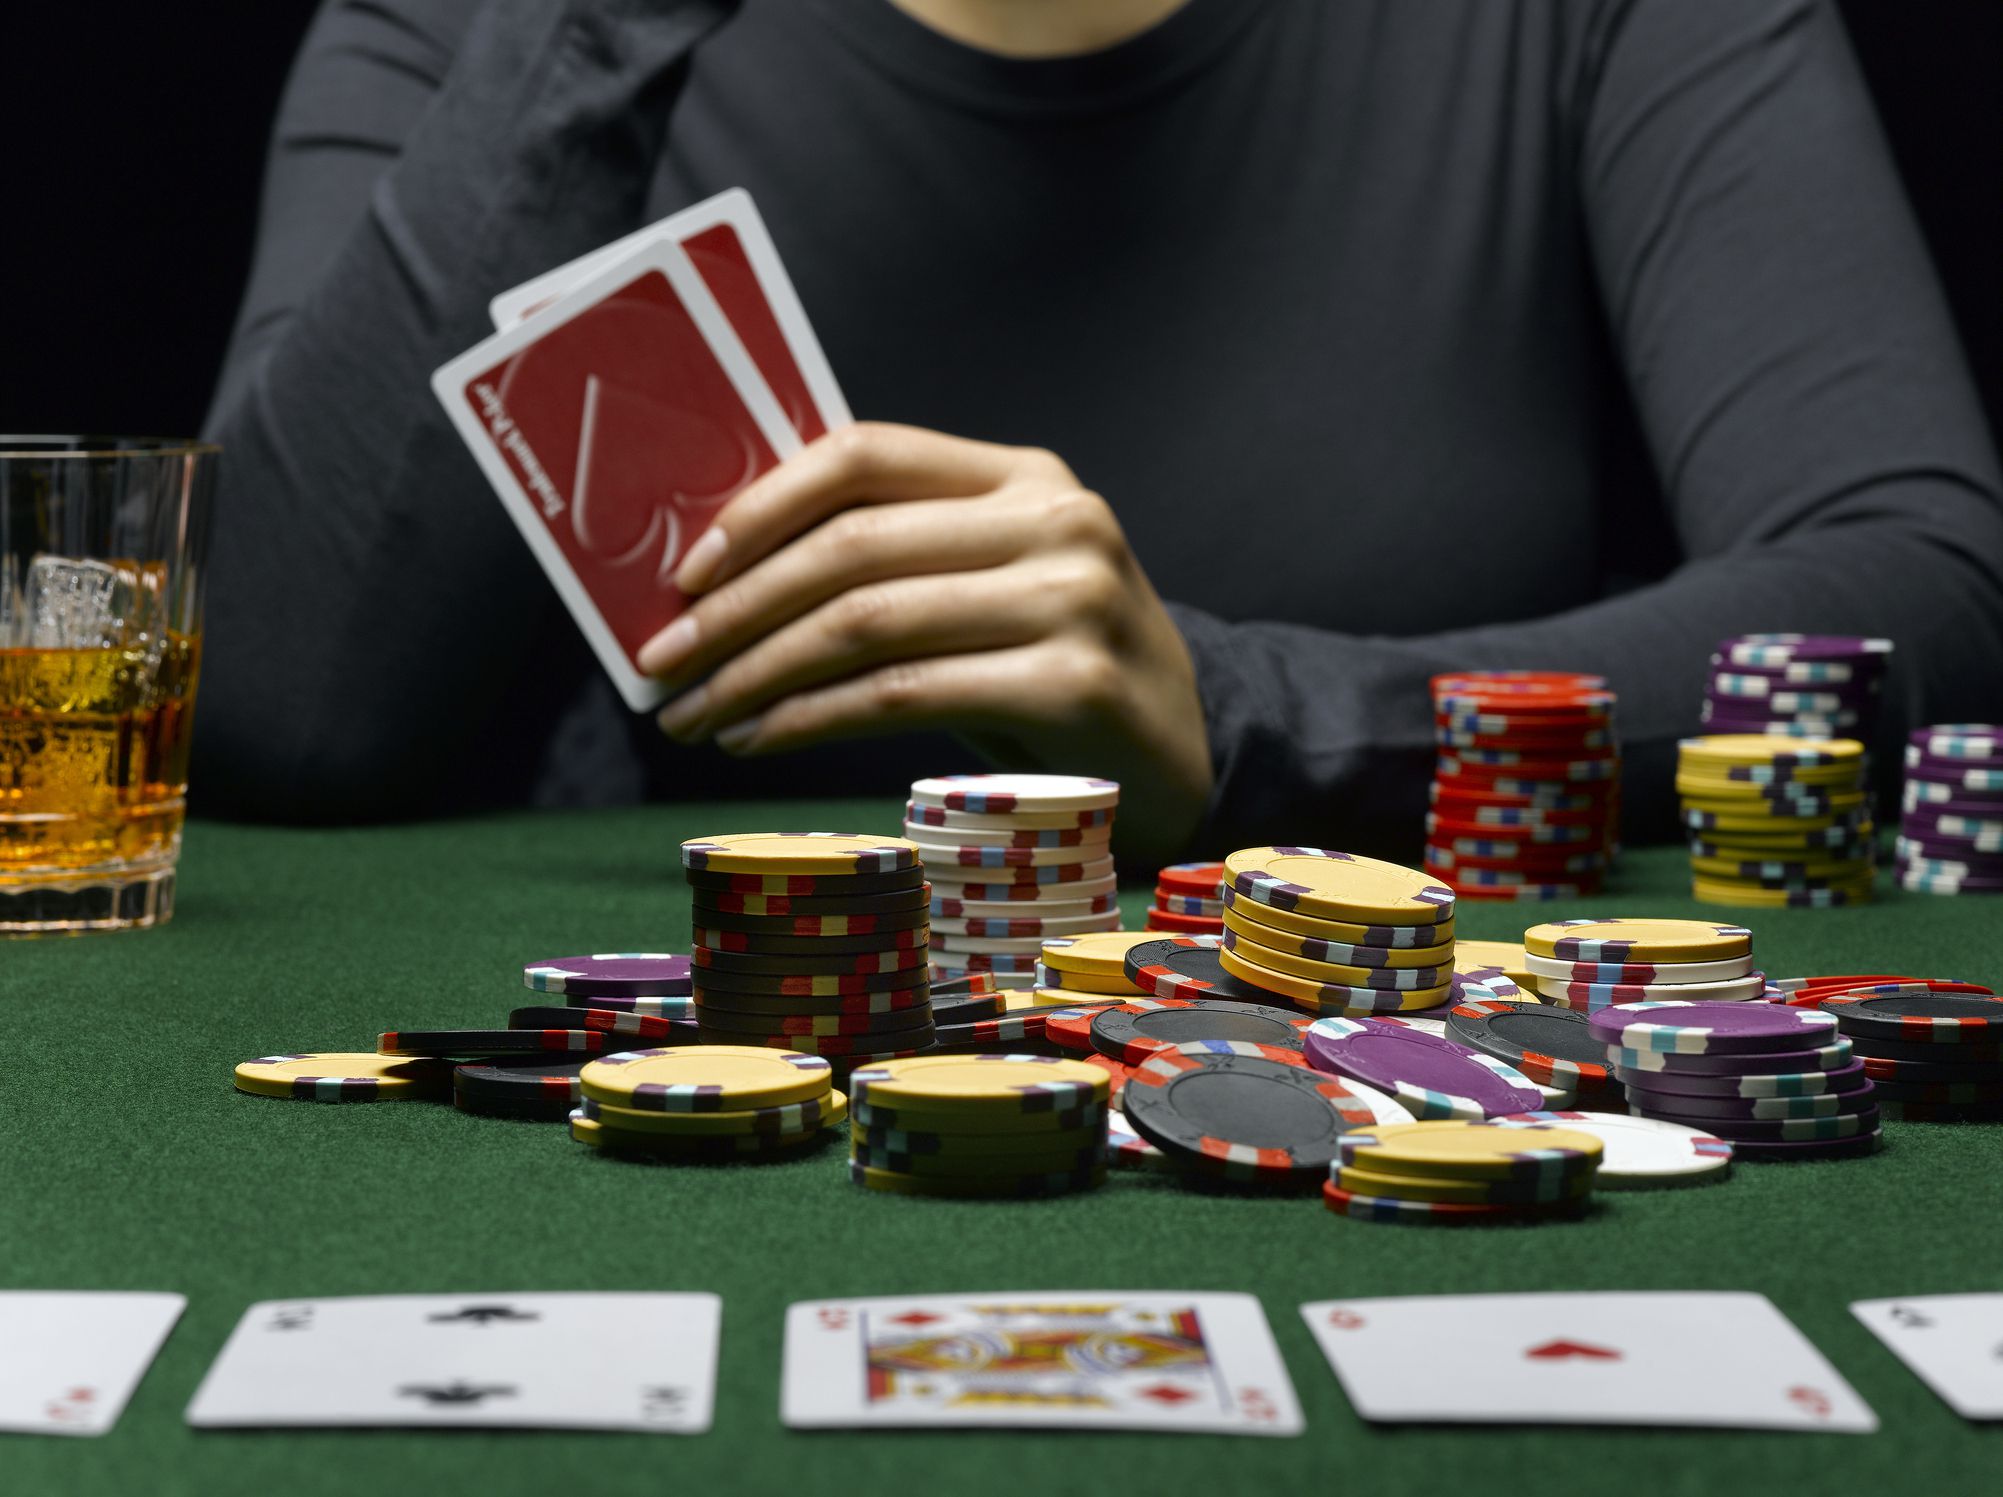 Why should you consider playing casino games online?